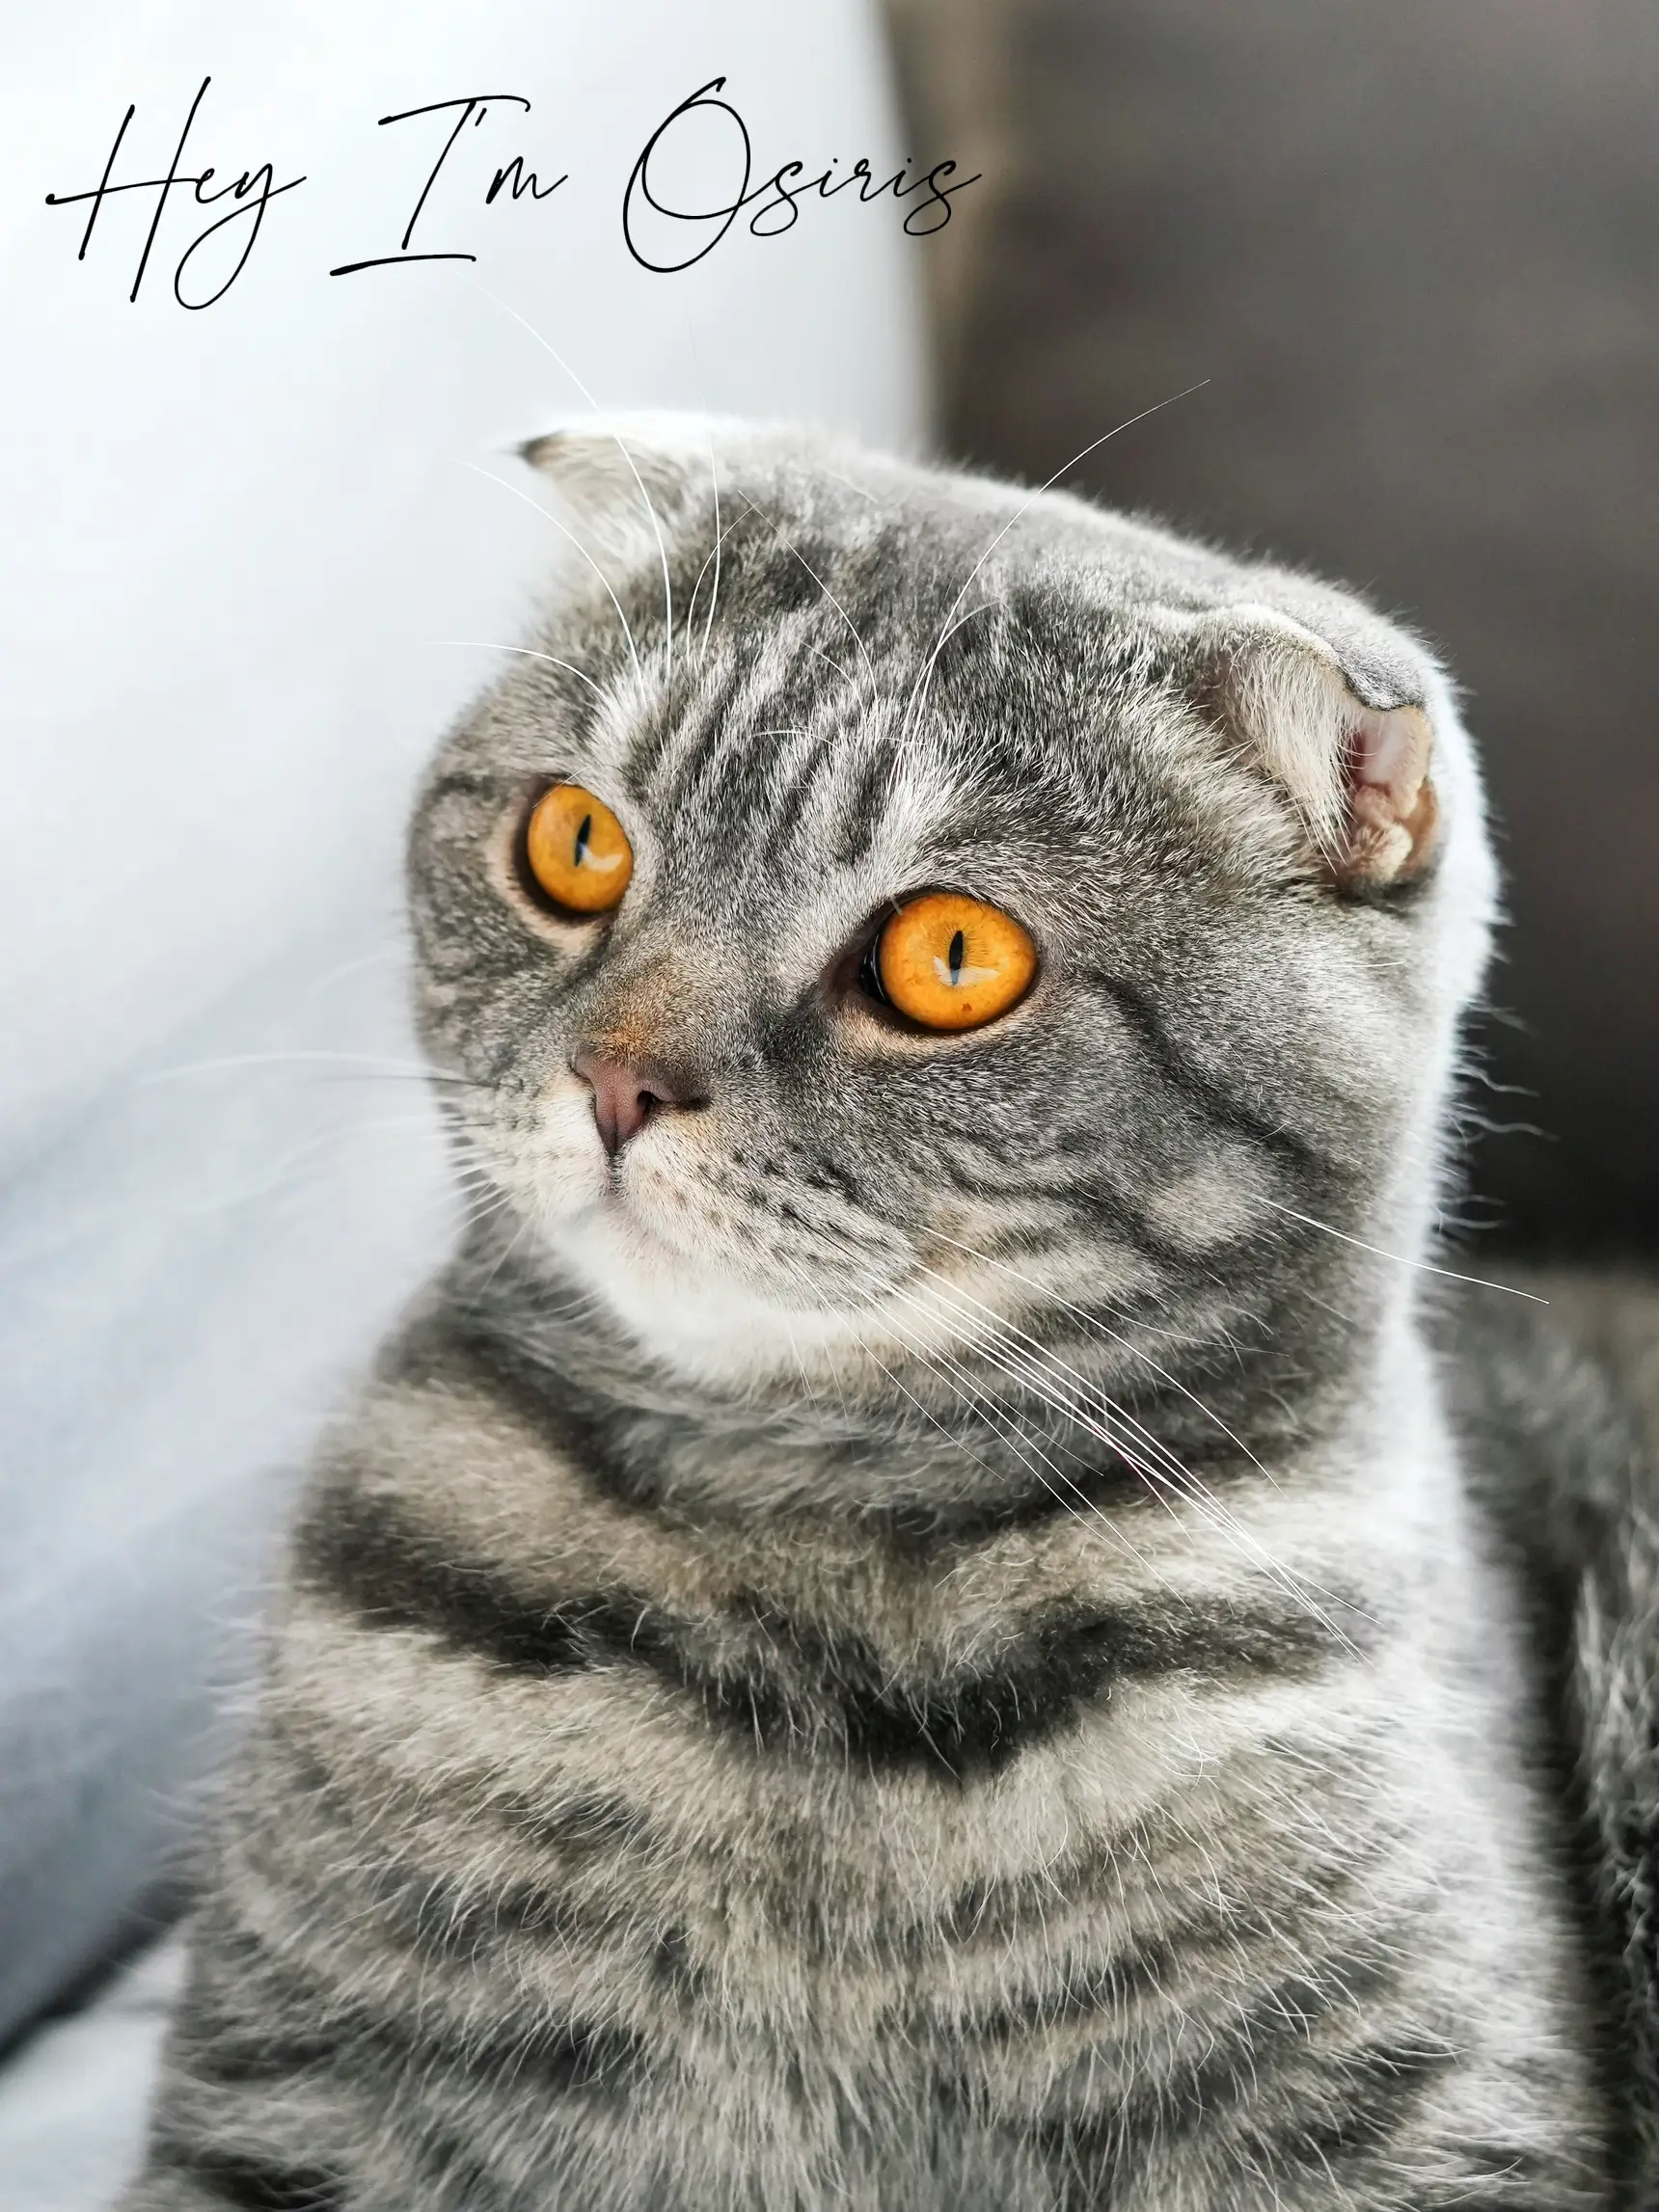 omg this face looks exactly like my little grey tabby cat Stardust